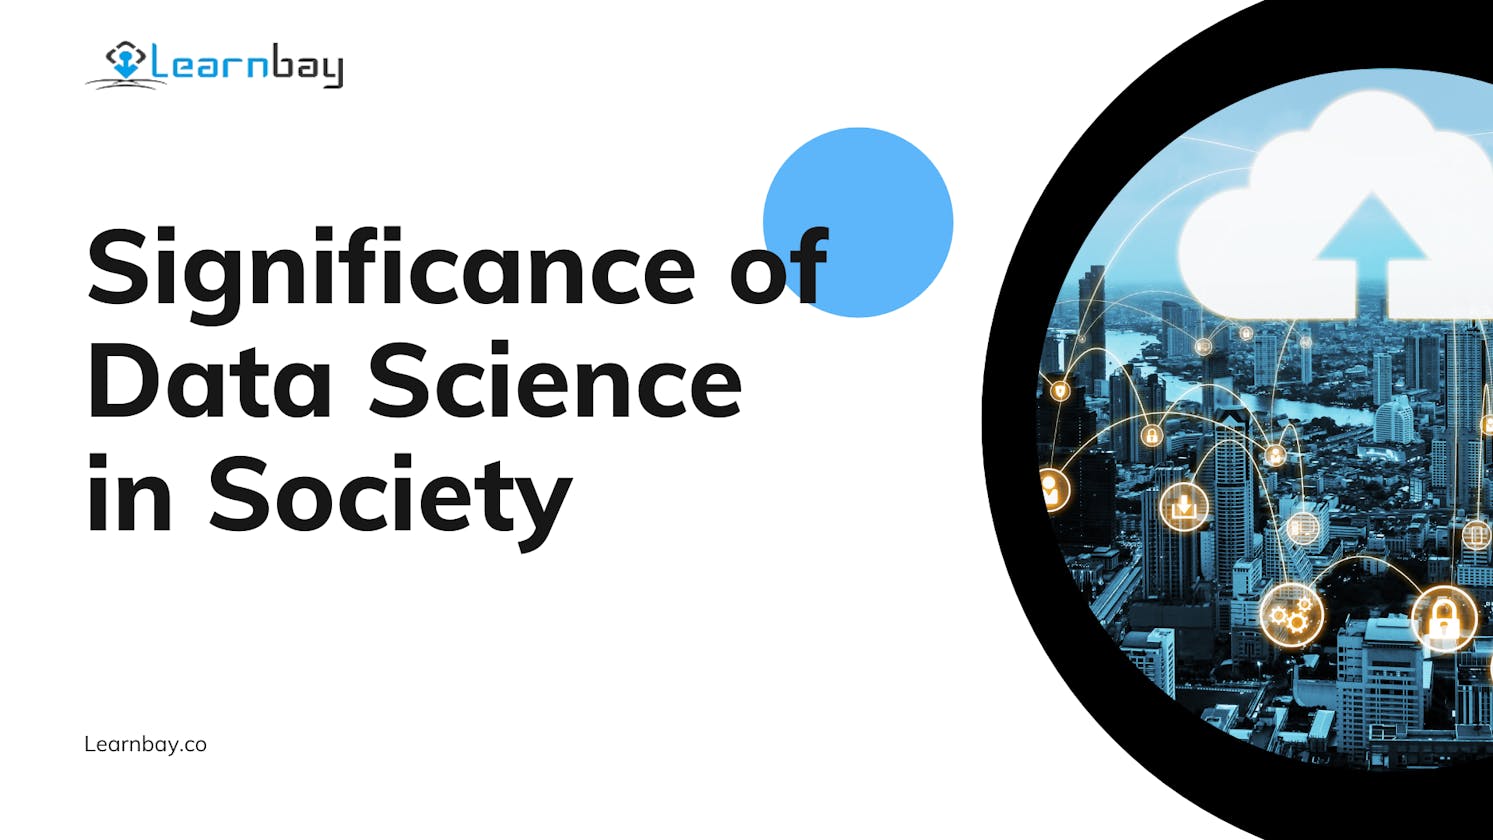 Significance of Data Science in Society